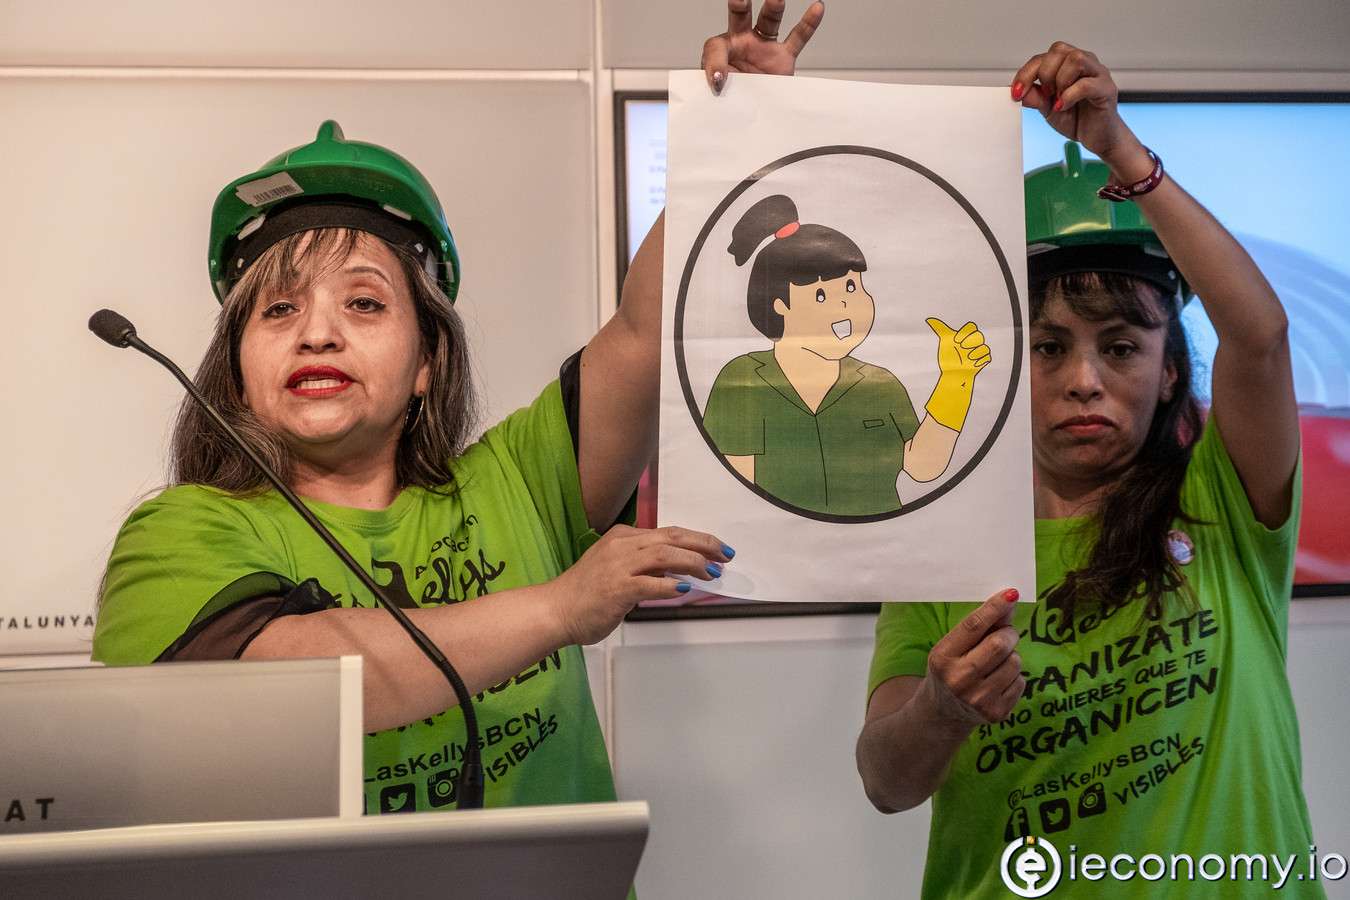 The maid organization in Spain is fighting against hotels